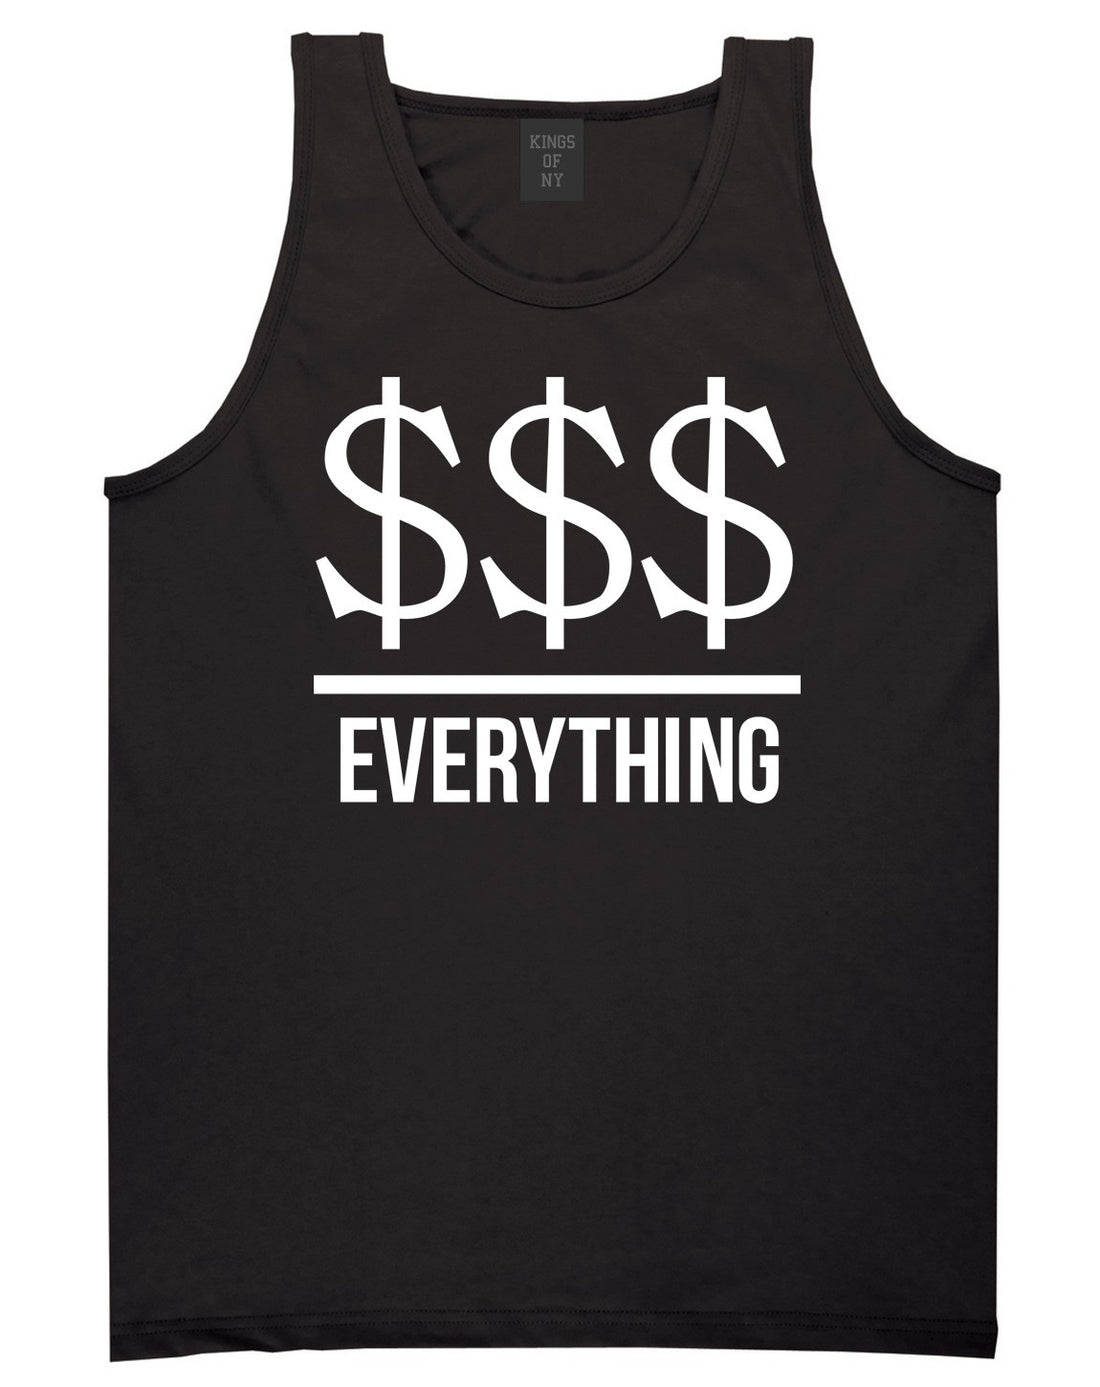 Kings Of NY Money Over Everything Tank Top in Black